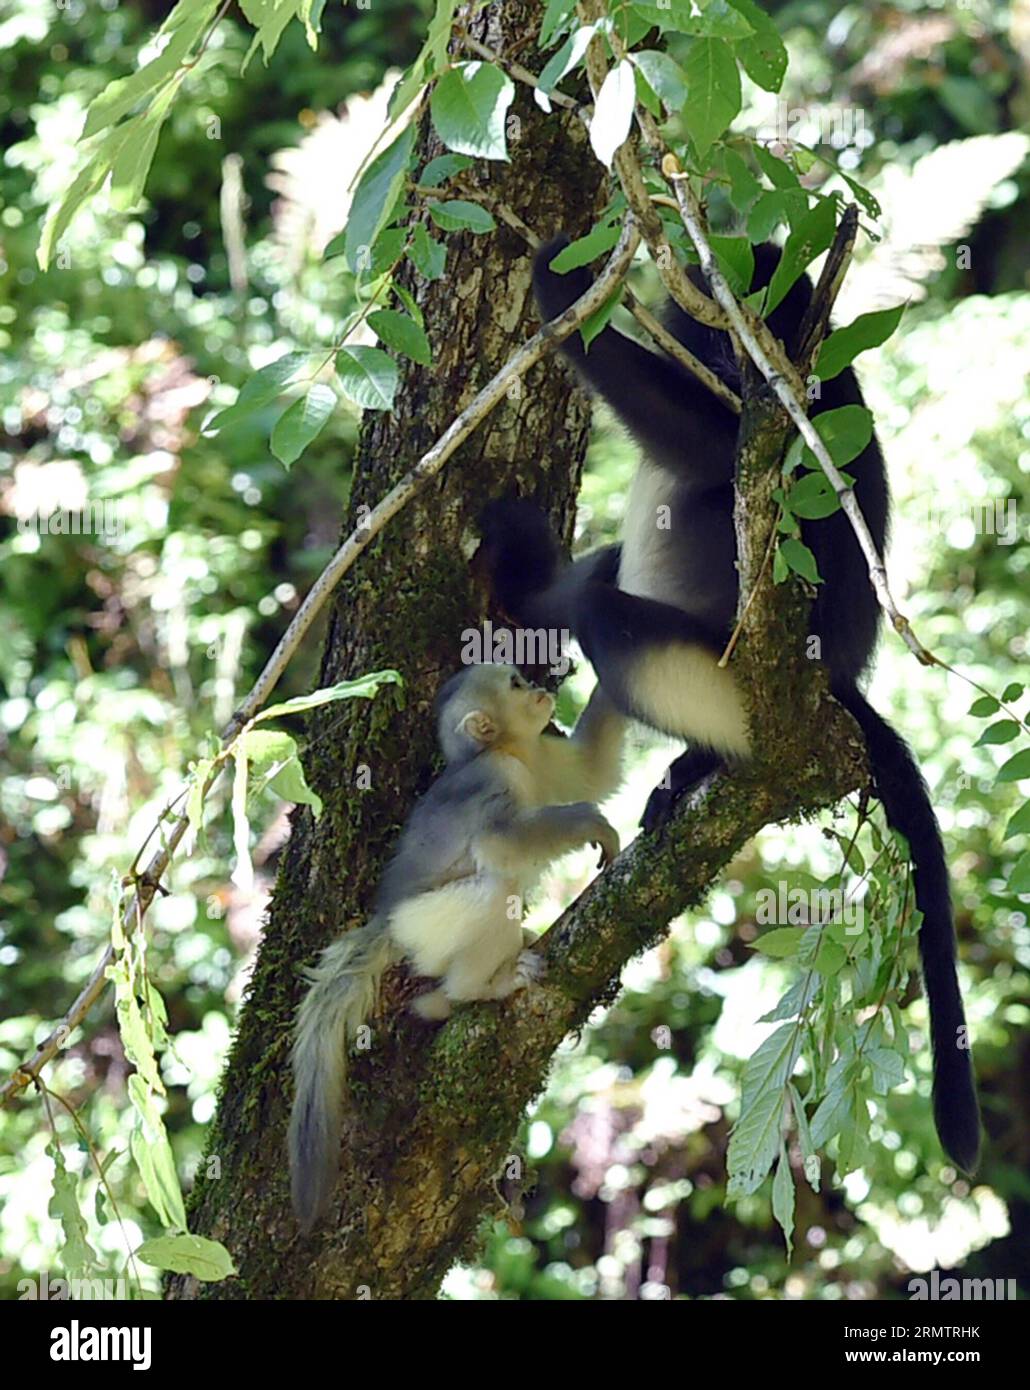 (140917) -- DEQUN,  -- A black snub-nosed monkey (Rhinopithecus bieti) cub plays with its mother on a tree branch in the Baimang Mountain National Natural Reserve in the Tibetan Autonomous Prefecture of Deqen in southwest China s Yunnan Province, Sept. 16, 2014. The population of black snub-nosed monkeys within the Baimang Mountain National Natural Reserve has expanded by about 50 as of September. In August 2013, a 5.1-magnitude earthquake in Deqen had exerted adverse effects to the habitats of black snub-nosed monkeys here. Their living environments have been restored under protective efforts Stock Photo